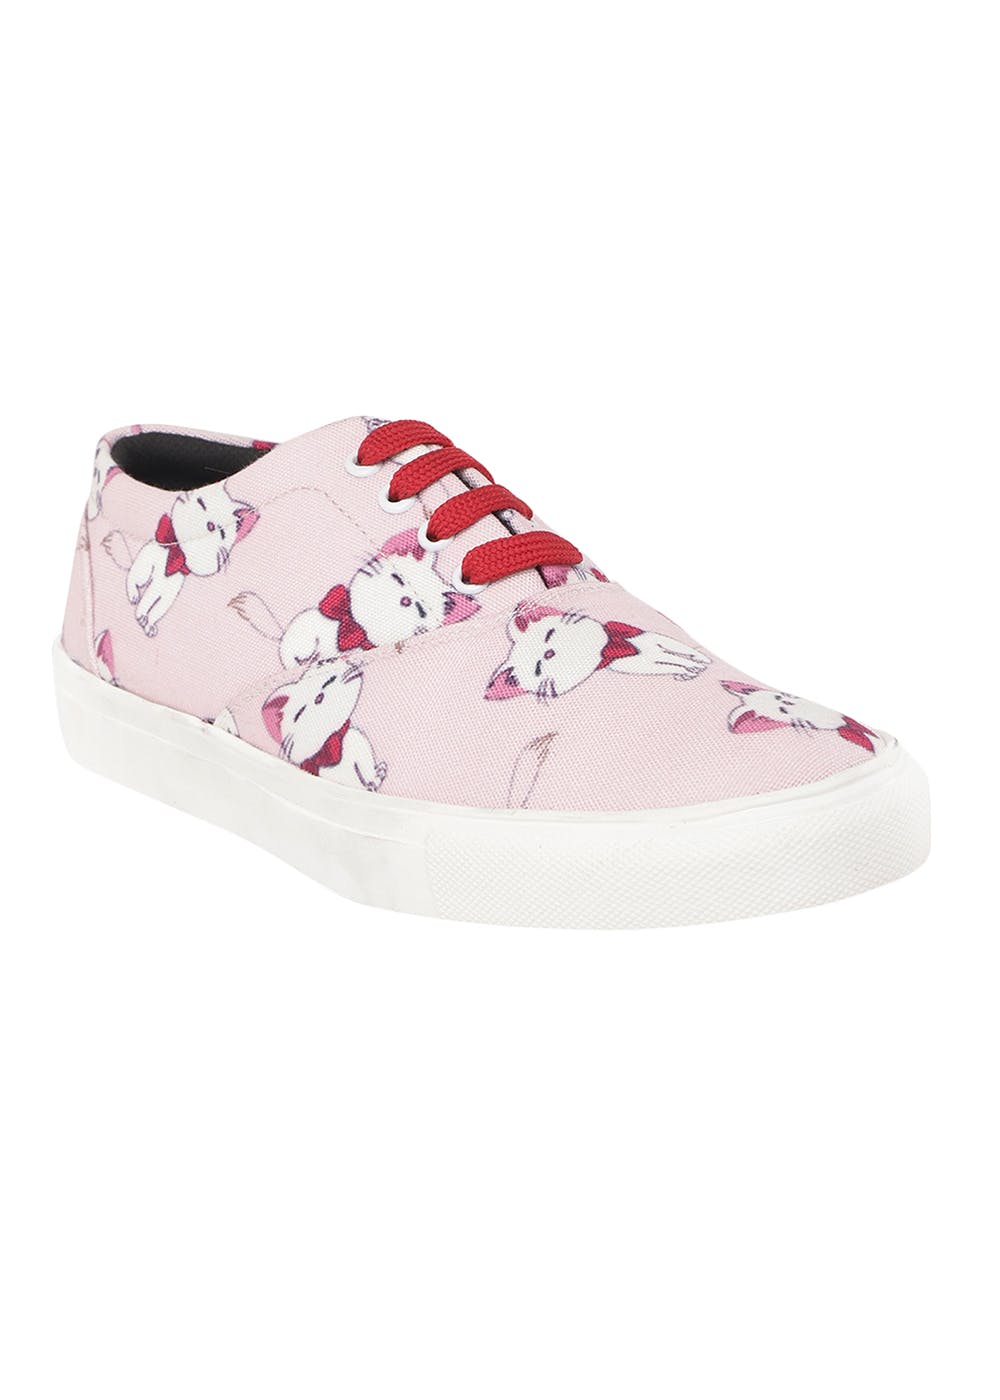 Get Cat Printed Pink Canvas Sneakers at ₹ 1199 | LBB Shop